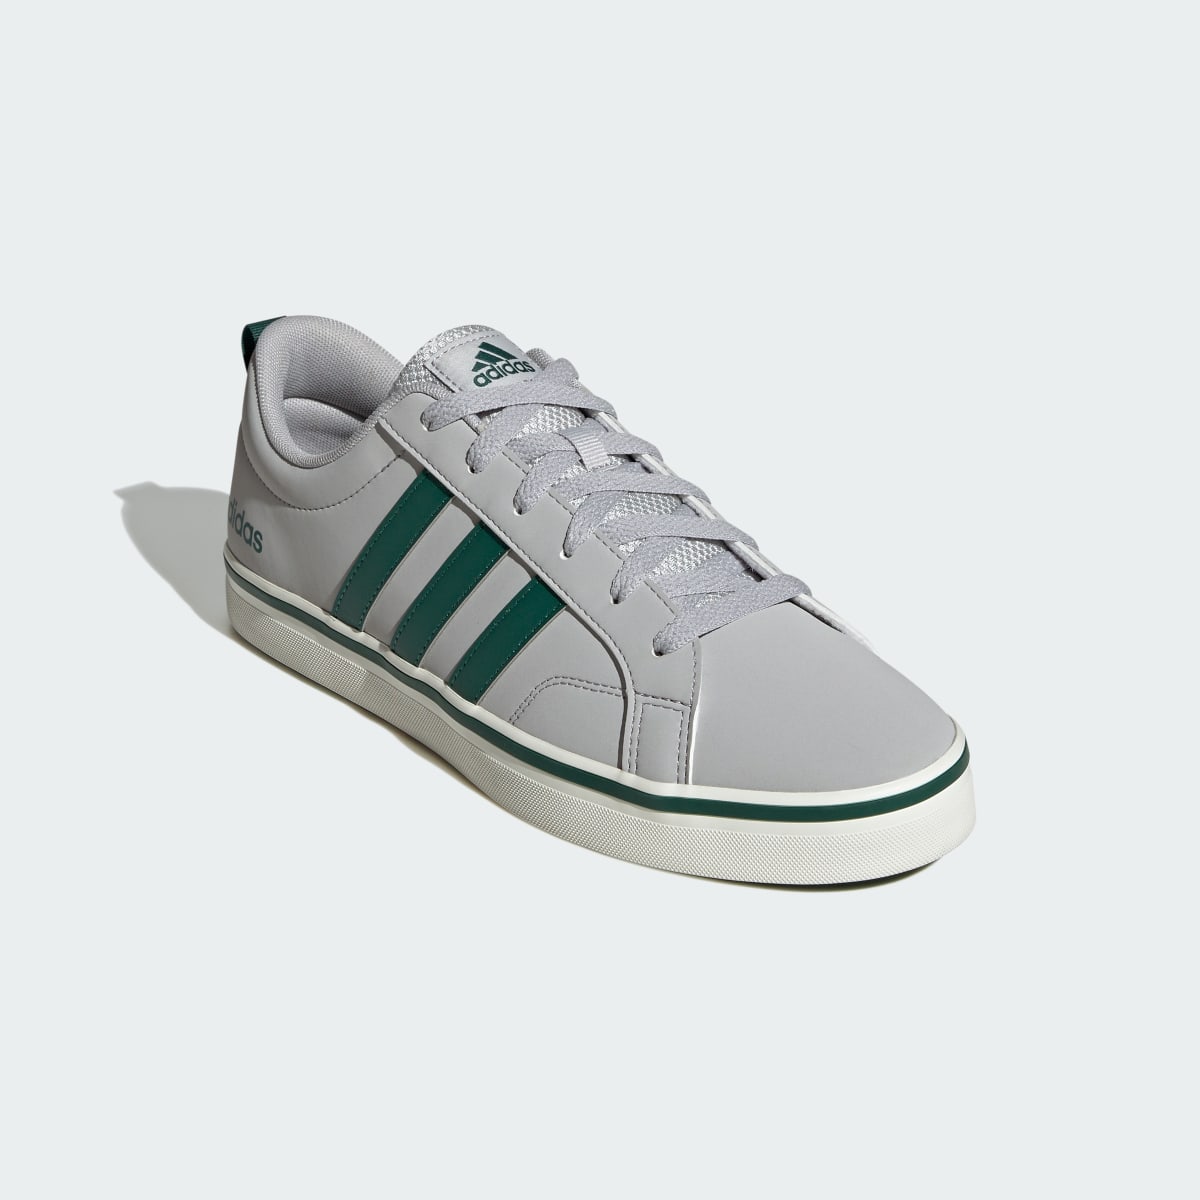 Adidas VS Pace 2.0 Lifestyle Skateboarding Shoes. 5